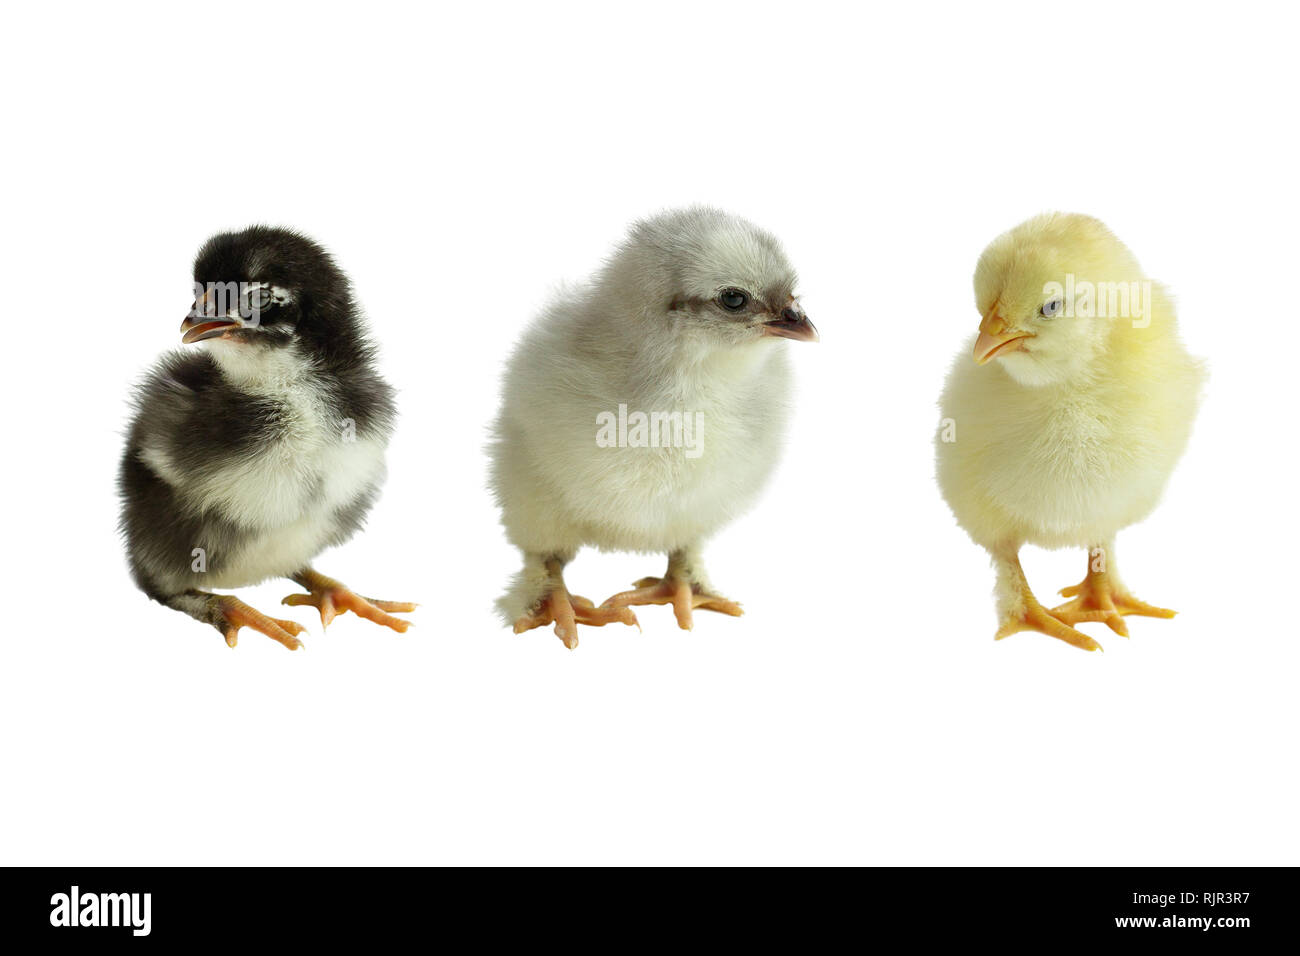 Three color variants of the French Copper Maran chickens / chicks isolated over a white background. Black, Blue and Splash. Stock Photo